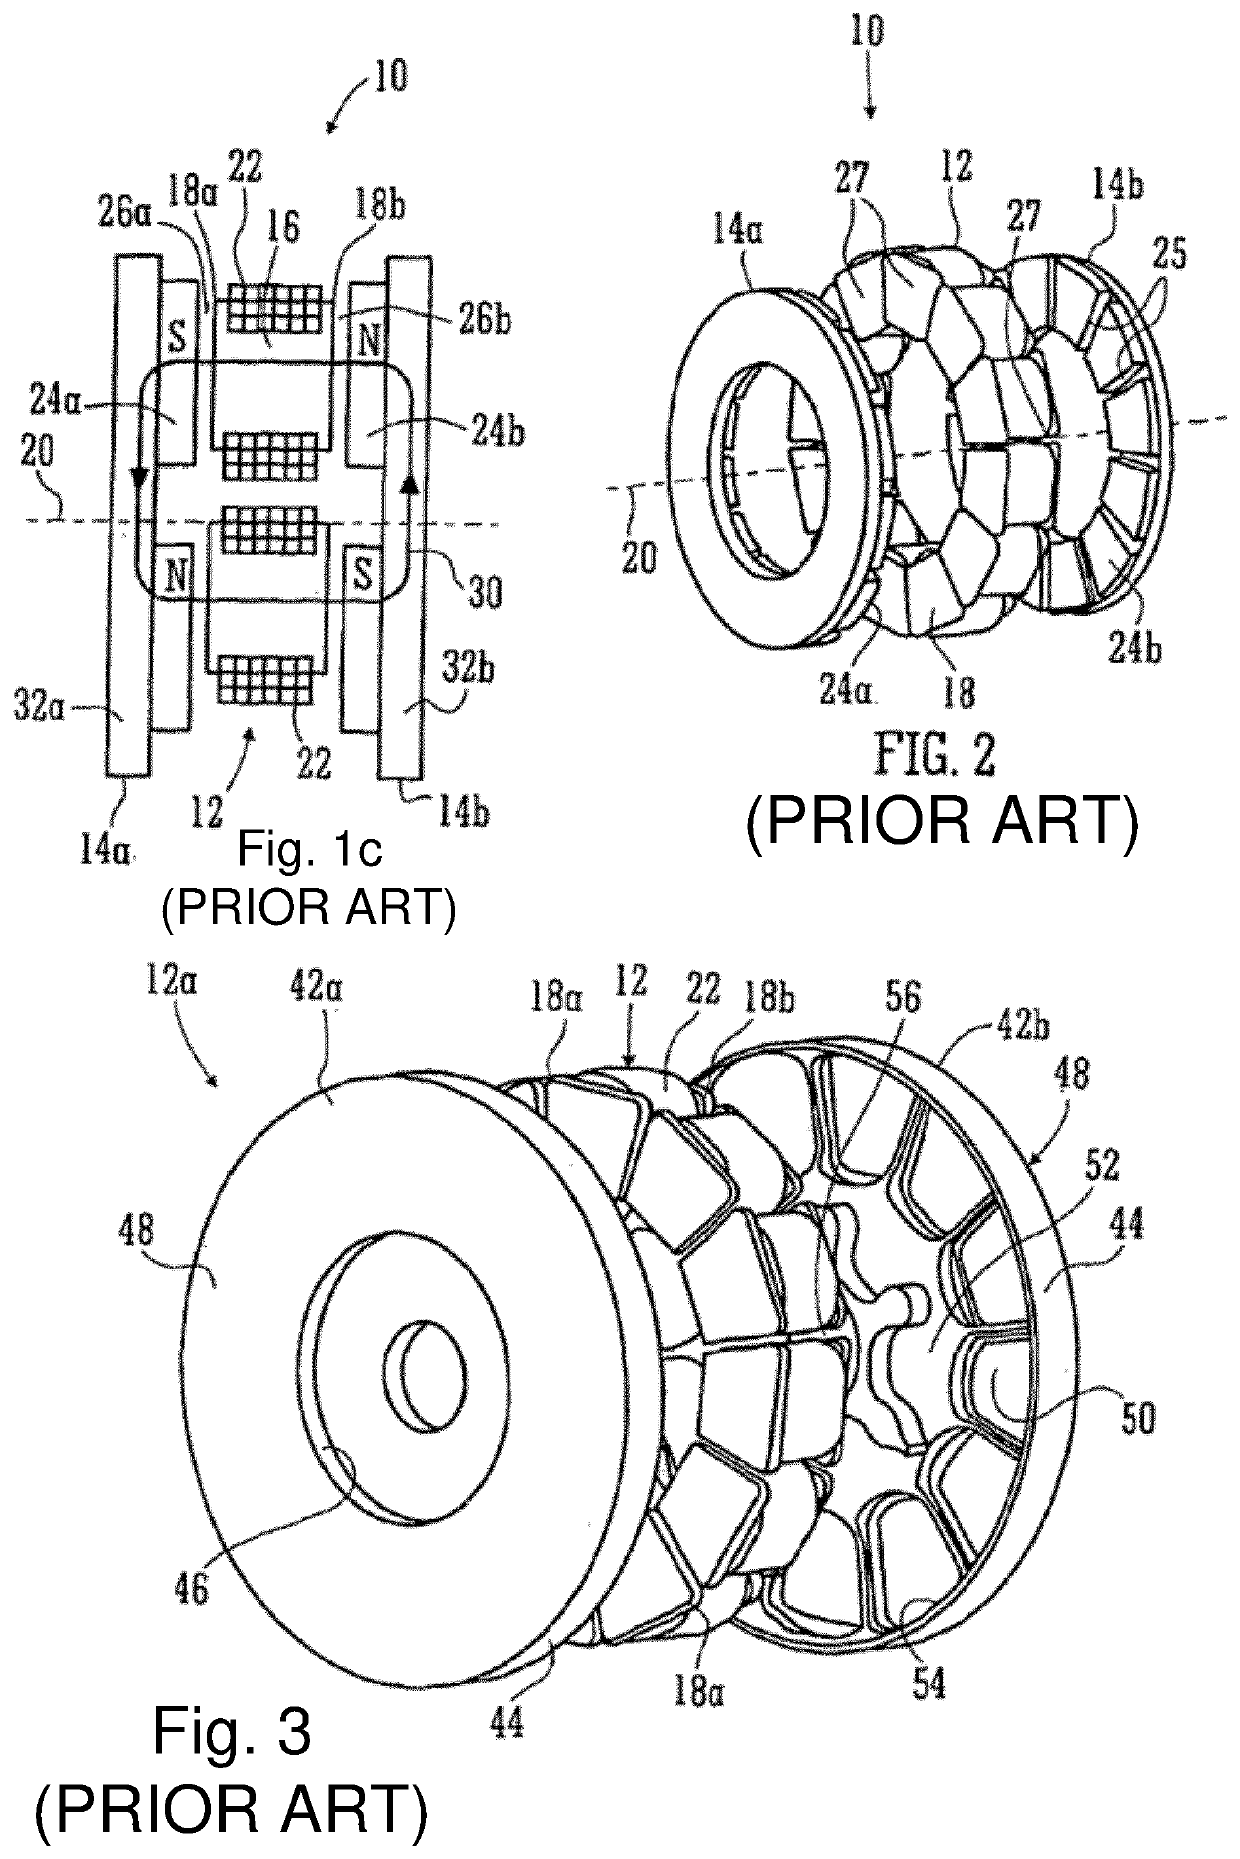 Stator for axial flux machine